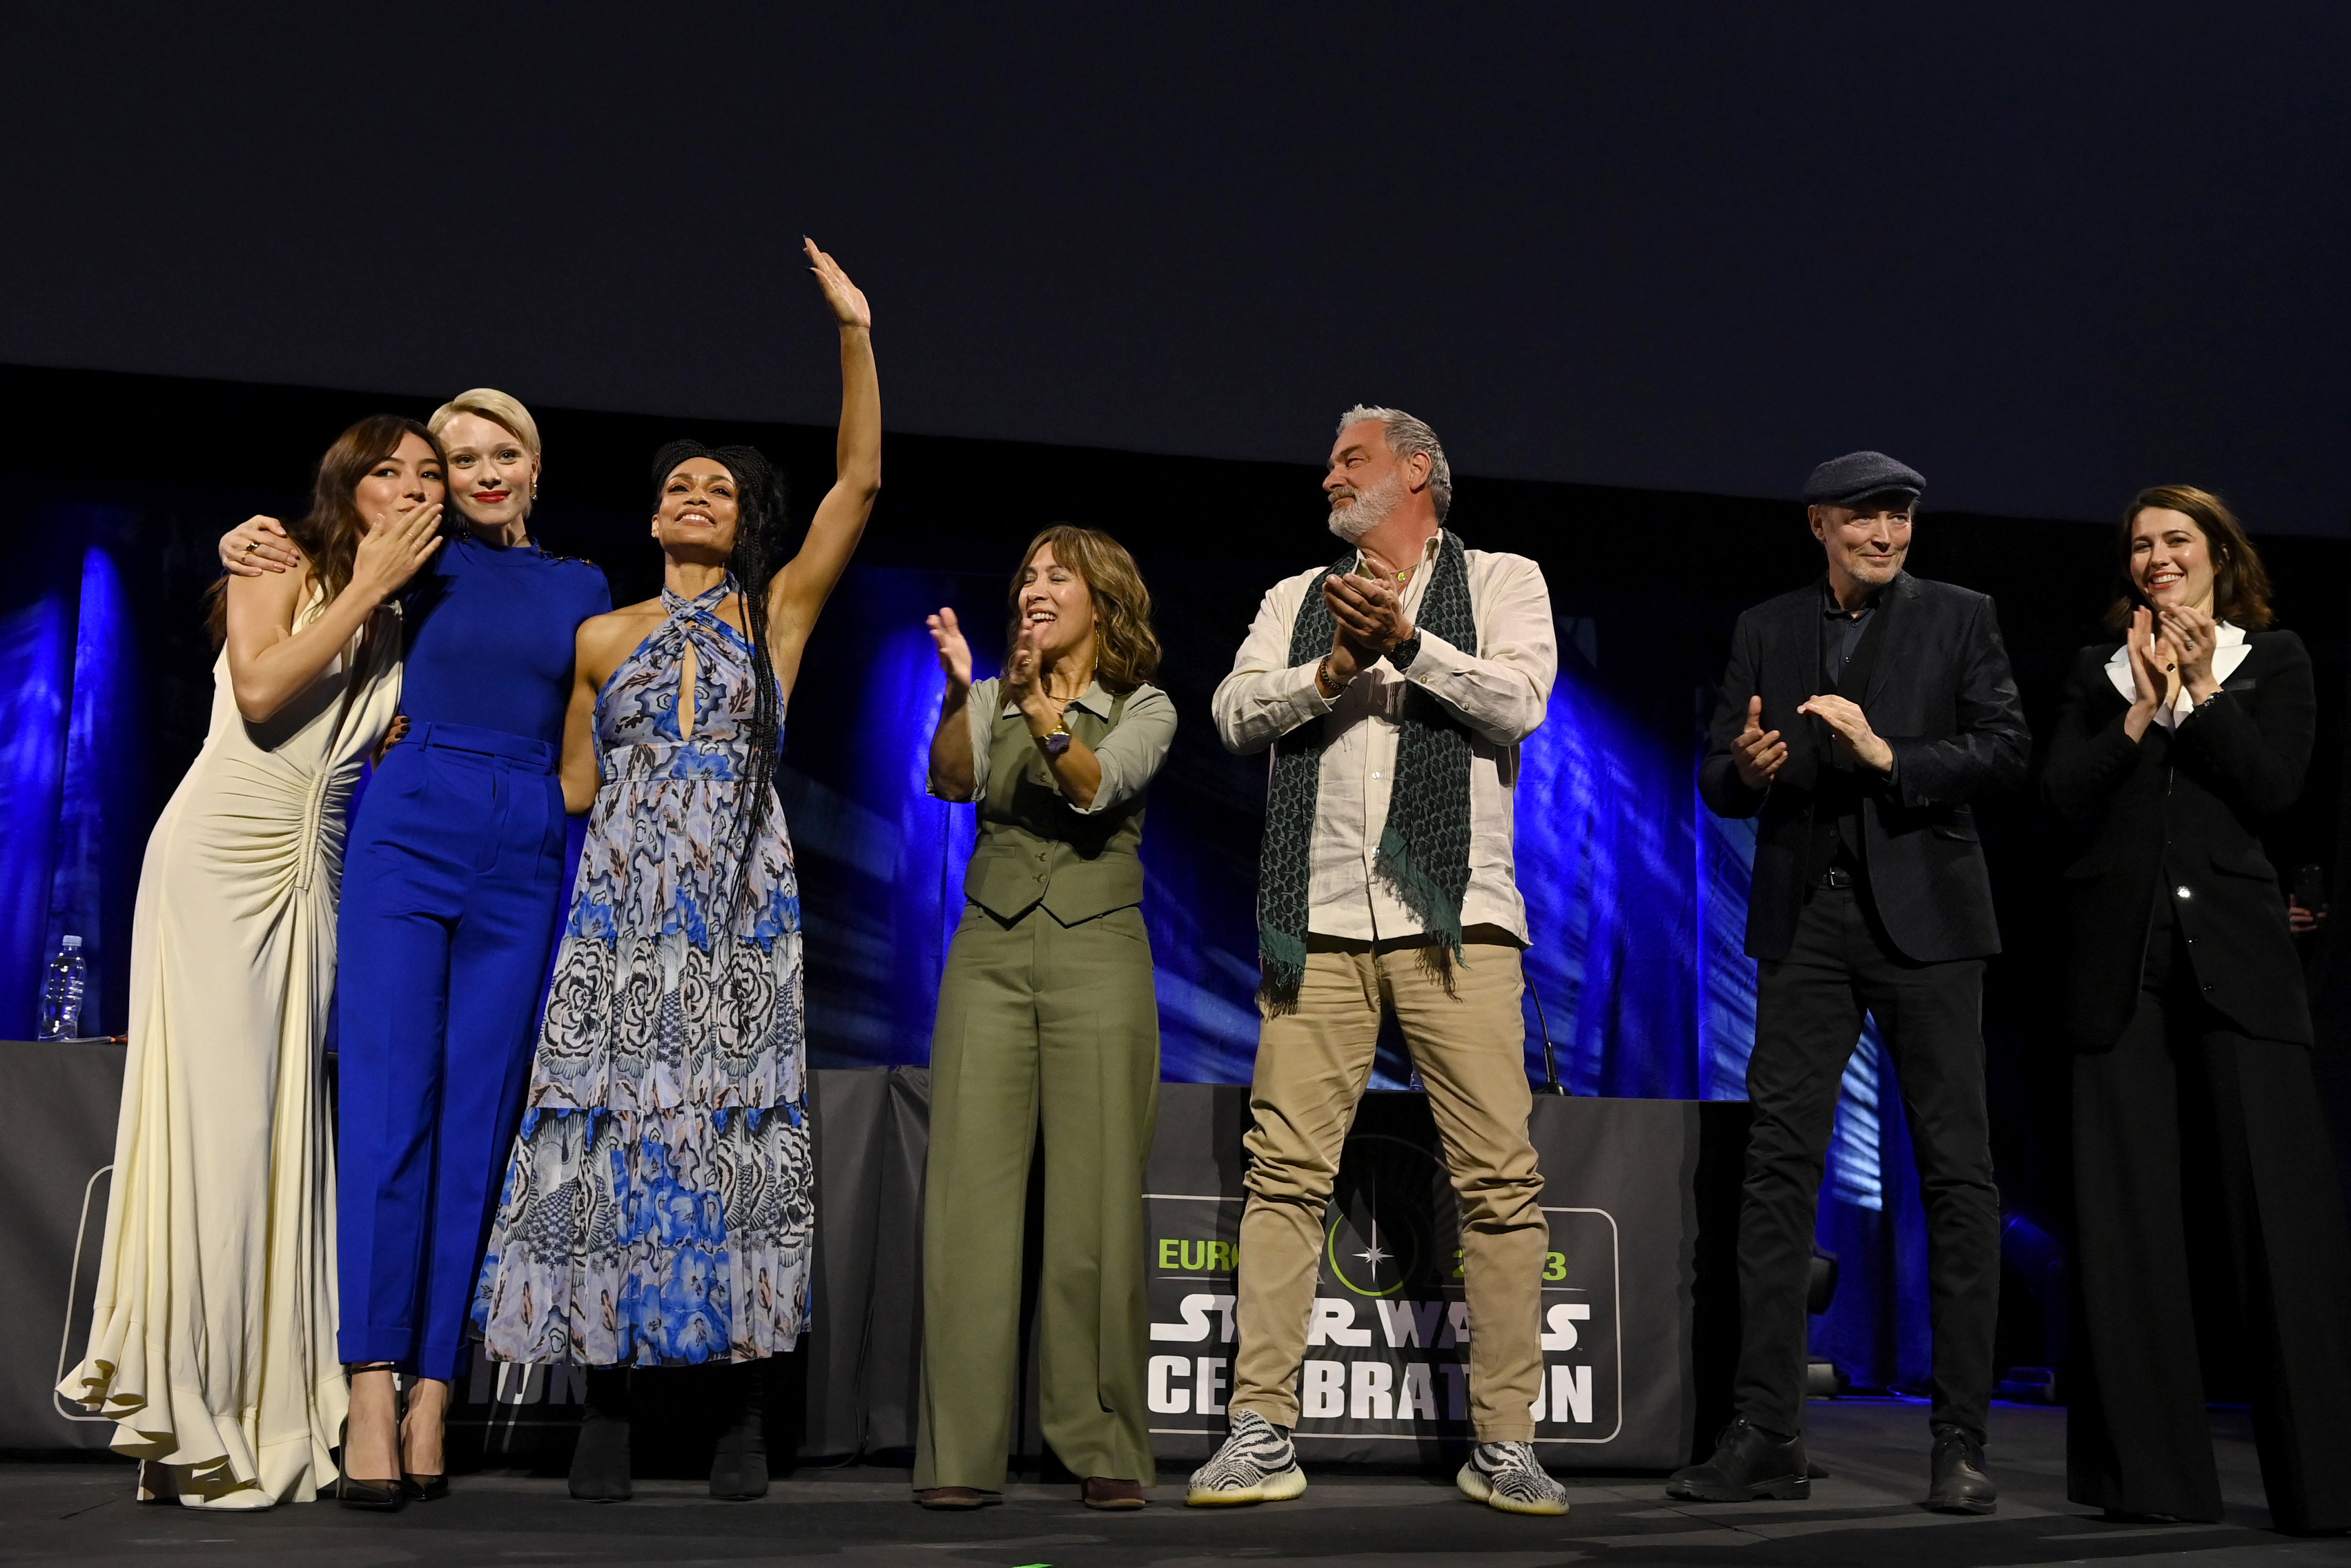 (L-R) Natasha Liu Bordizzo, Ivanna Sakhno, Rosario Dawson, Diana Lee Inosanto, Ray Stevenson, Lars Mikkelson, and Mary Elizabeth Winstead during the "Ahsoka" panel at the "Star Wars Celebration 2023 in London, " at ExCel, on April 8, 2023 in London, England | Source: Getty Images